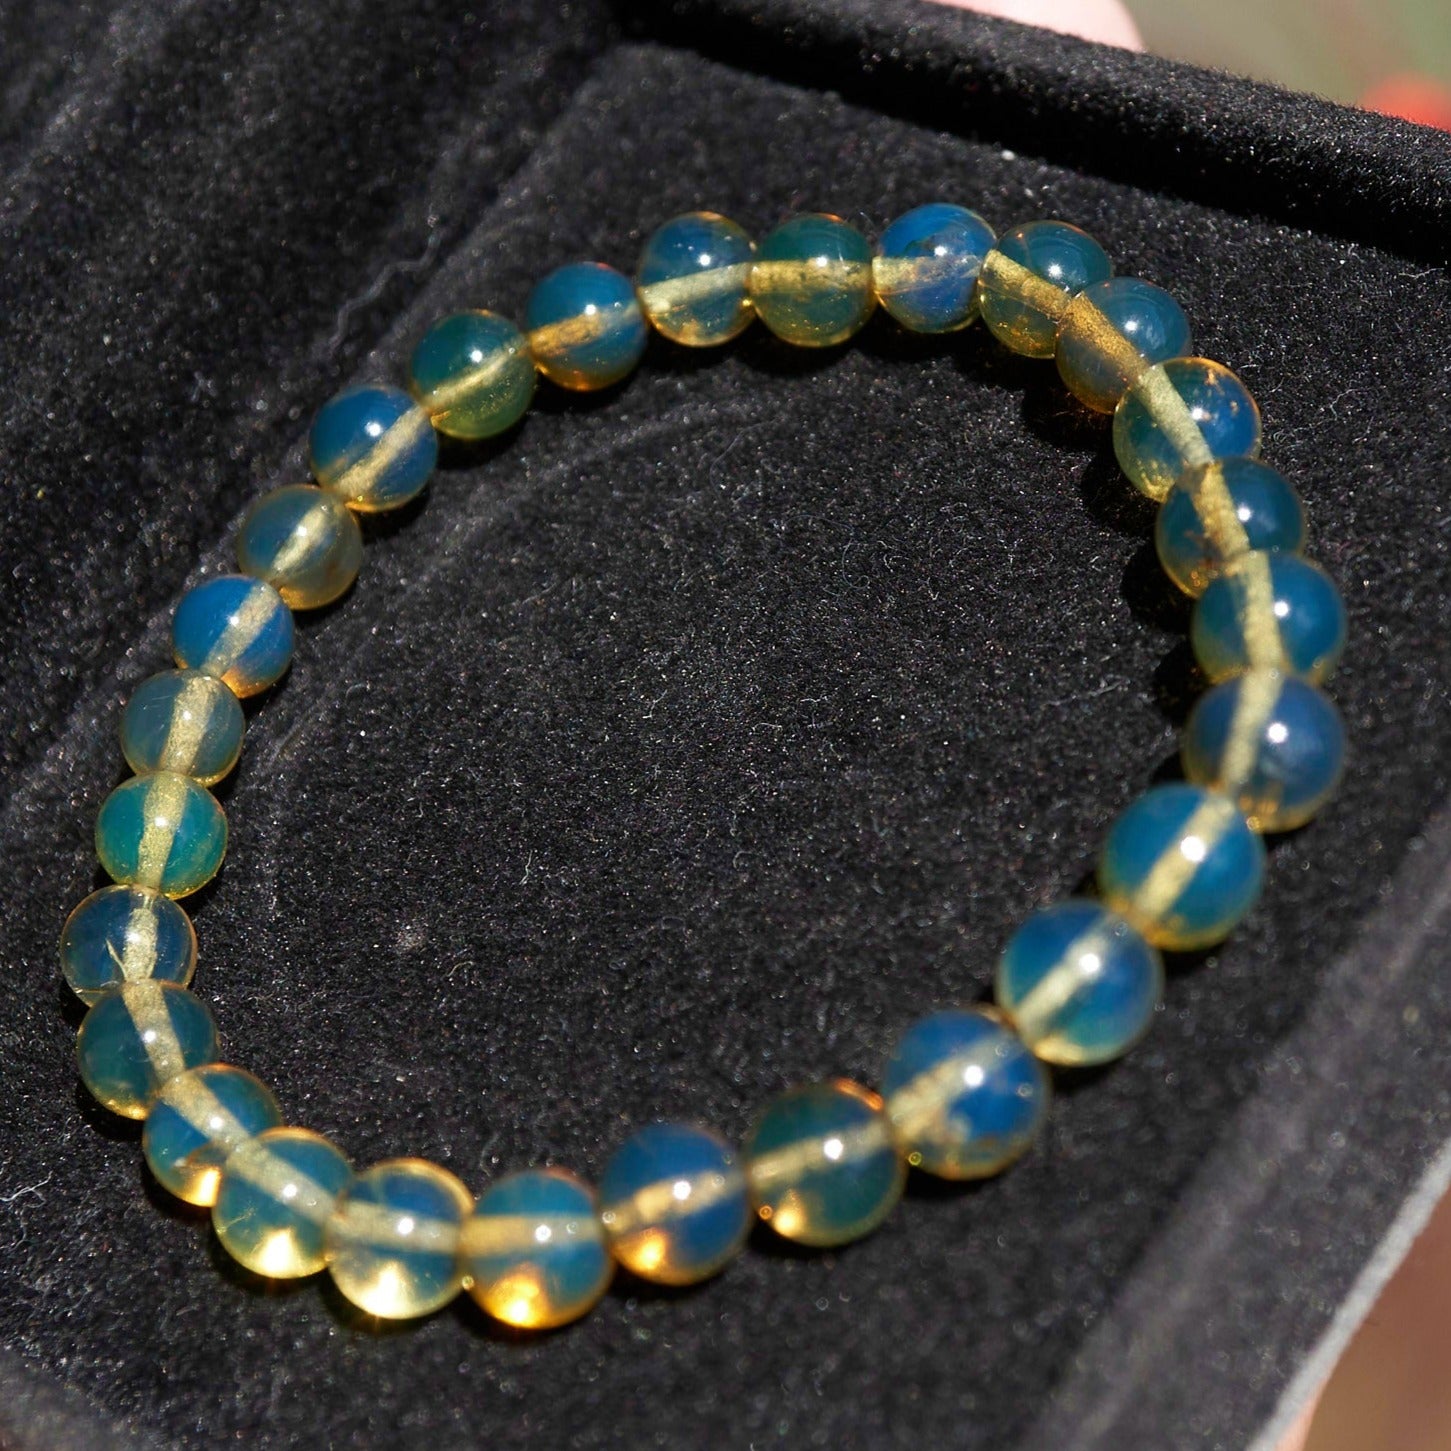 Authentic Blue Amber Dominican Beads bracelet